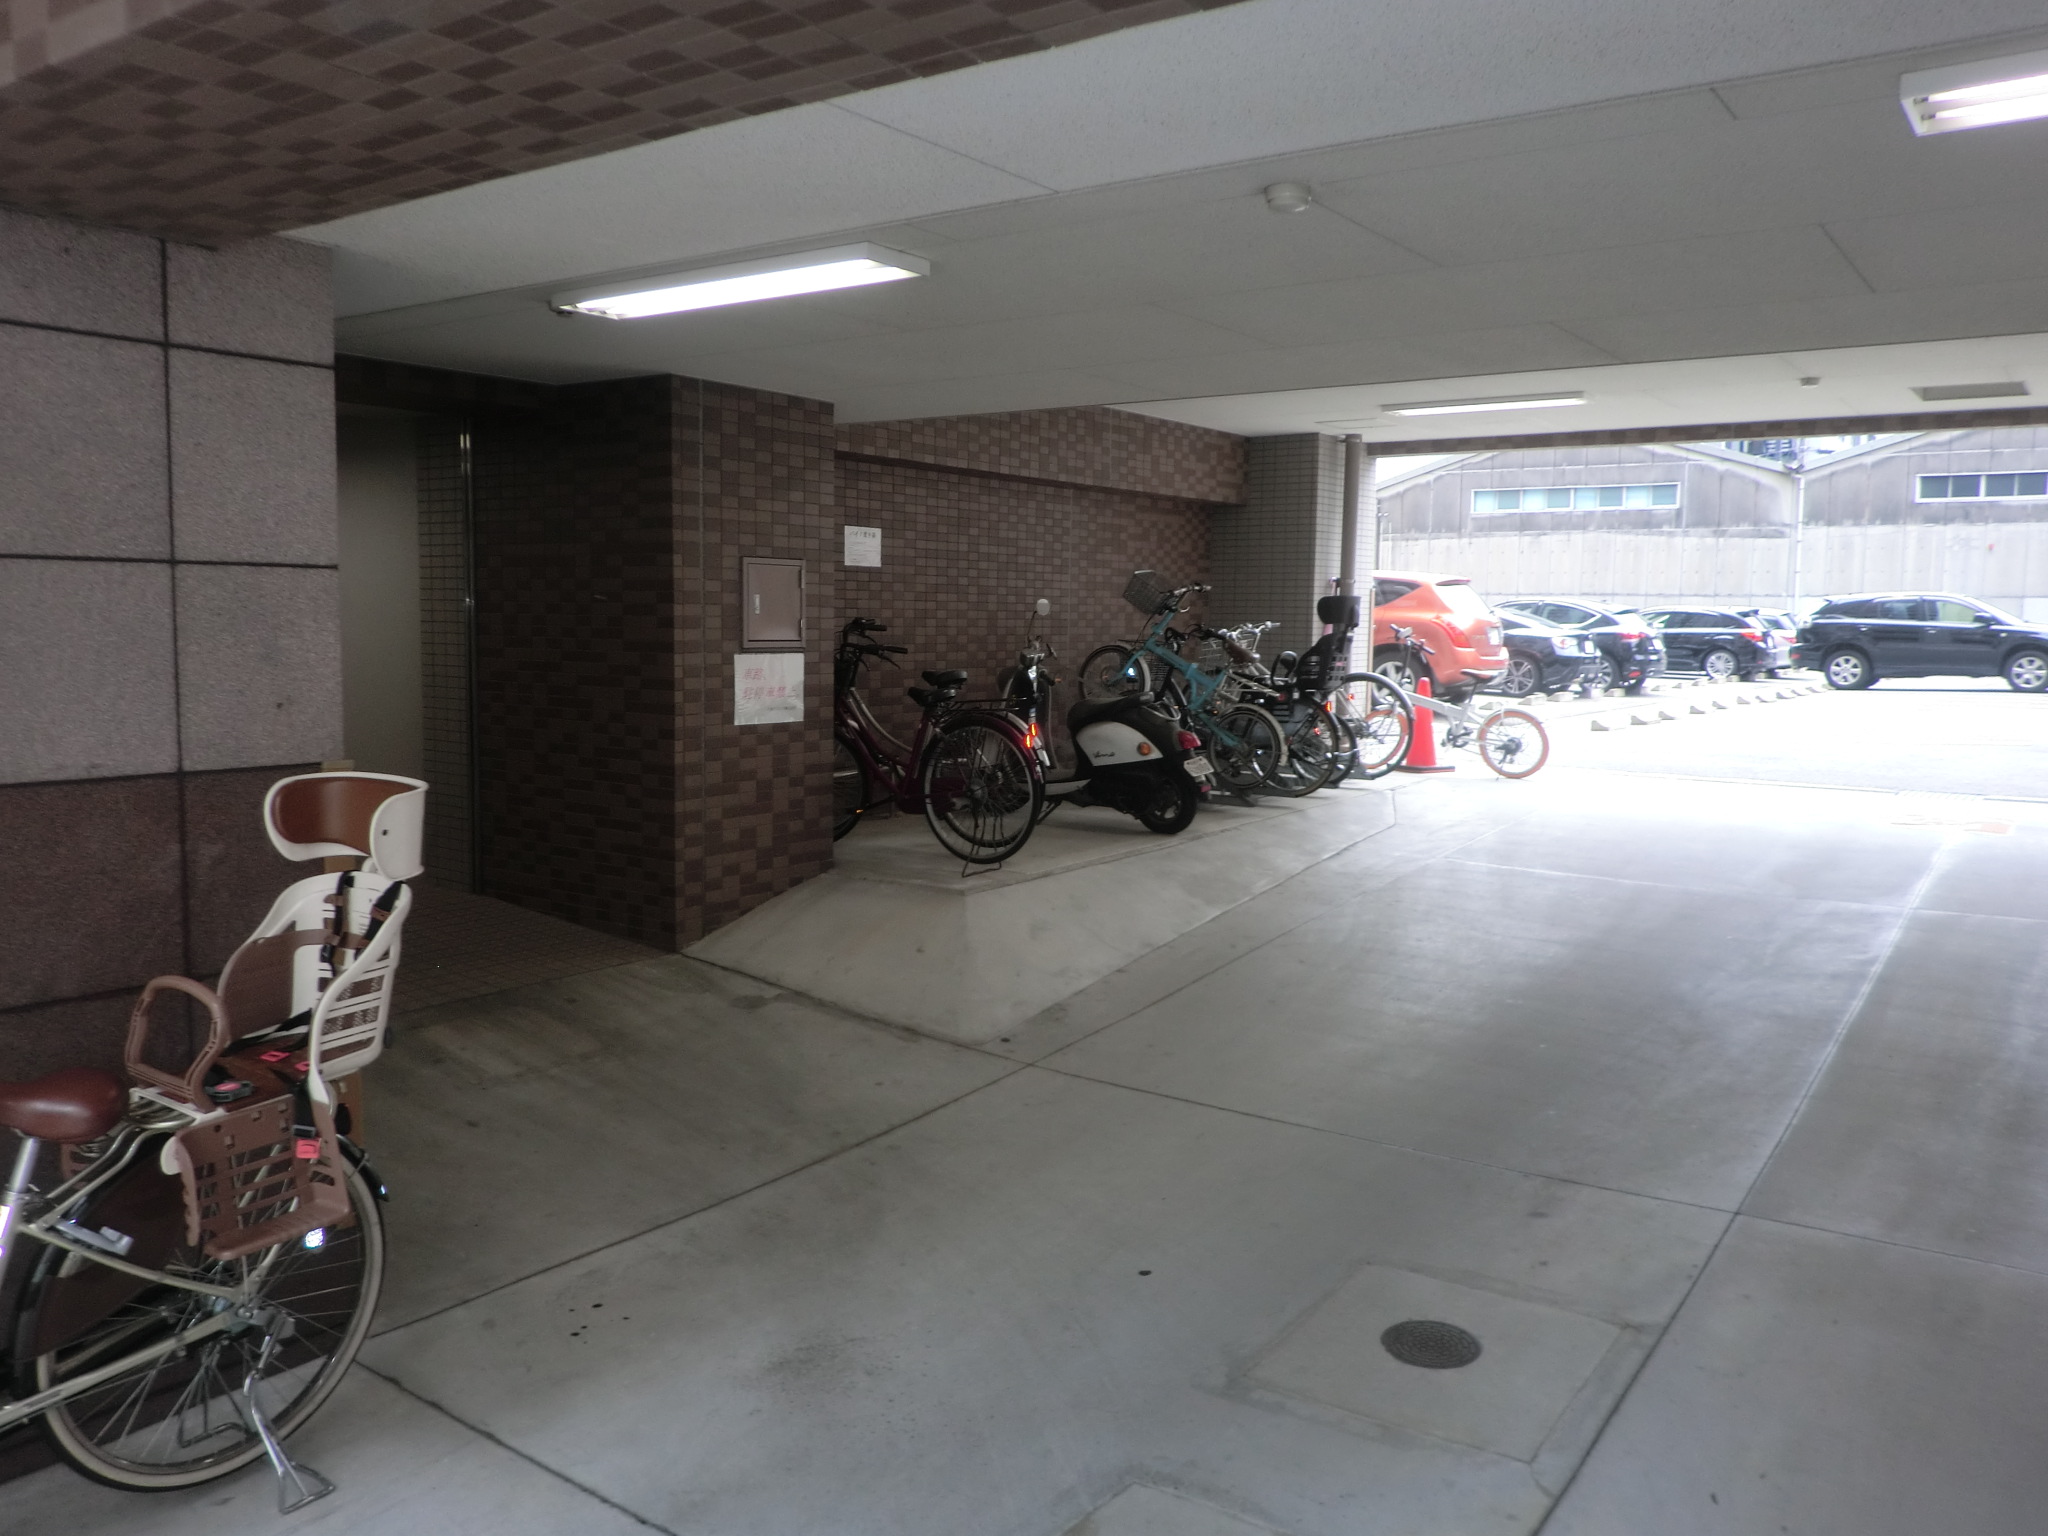 Other common areas. Wide bicycle parking space